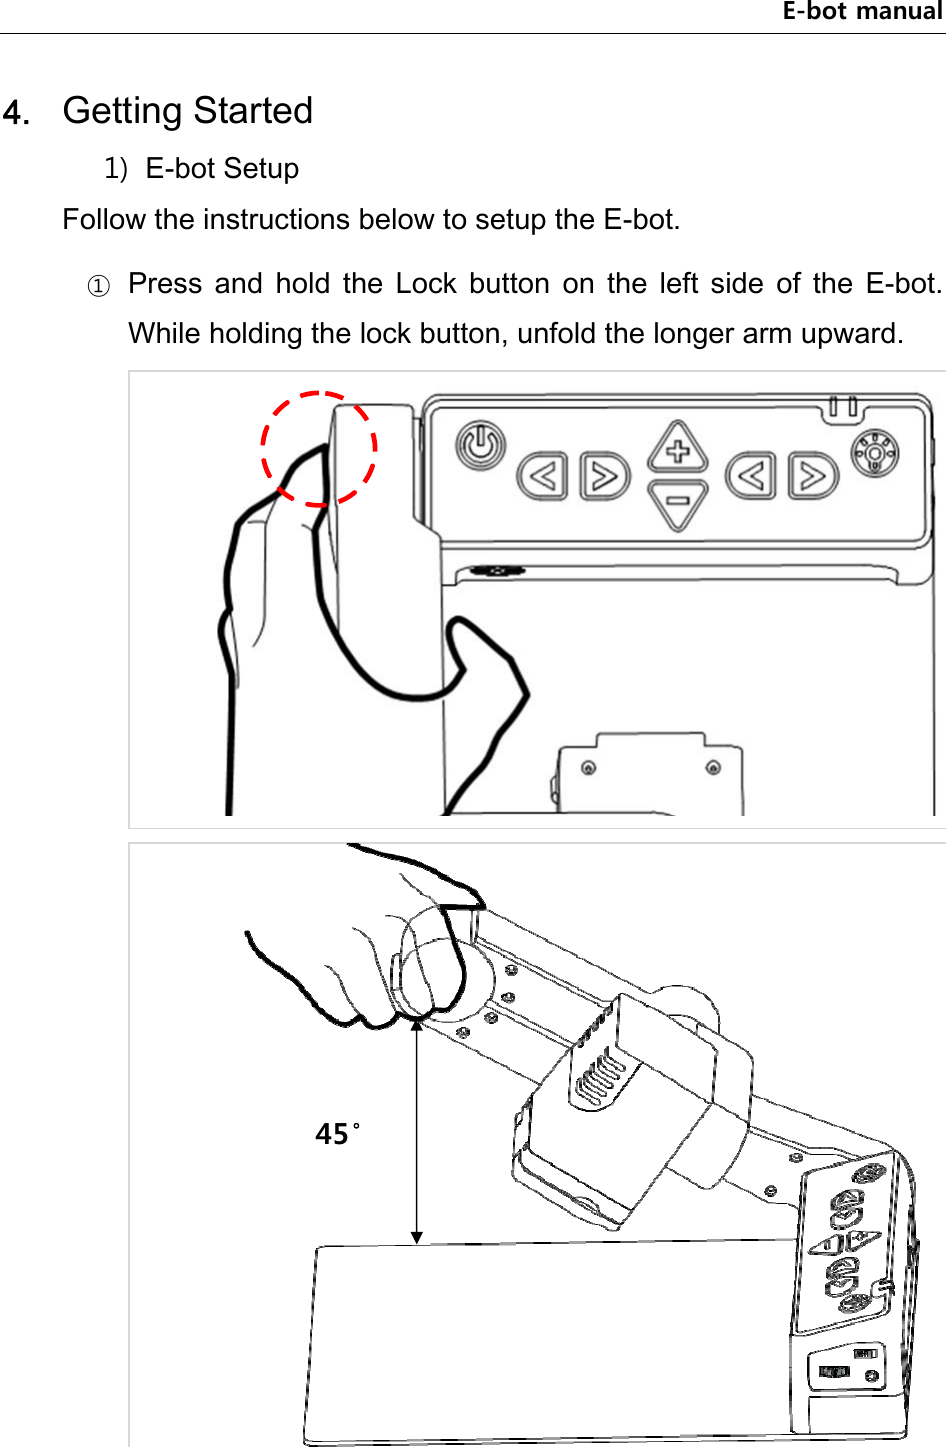 E-bot manual 4. Getting Started 1) E-bot Setup Follow the instructions below to setup the E-bot. ① Press  and  hold  the  Lock  button  on  the  left  side  of  the  E-bot. While holding the lock button, unfold the longer arm upward.    45° 